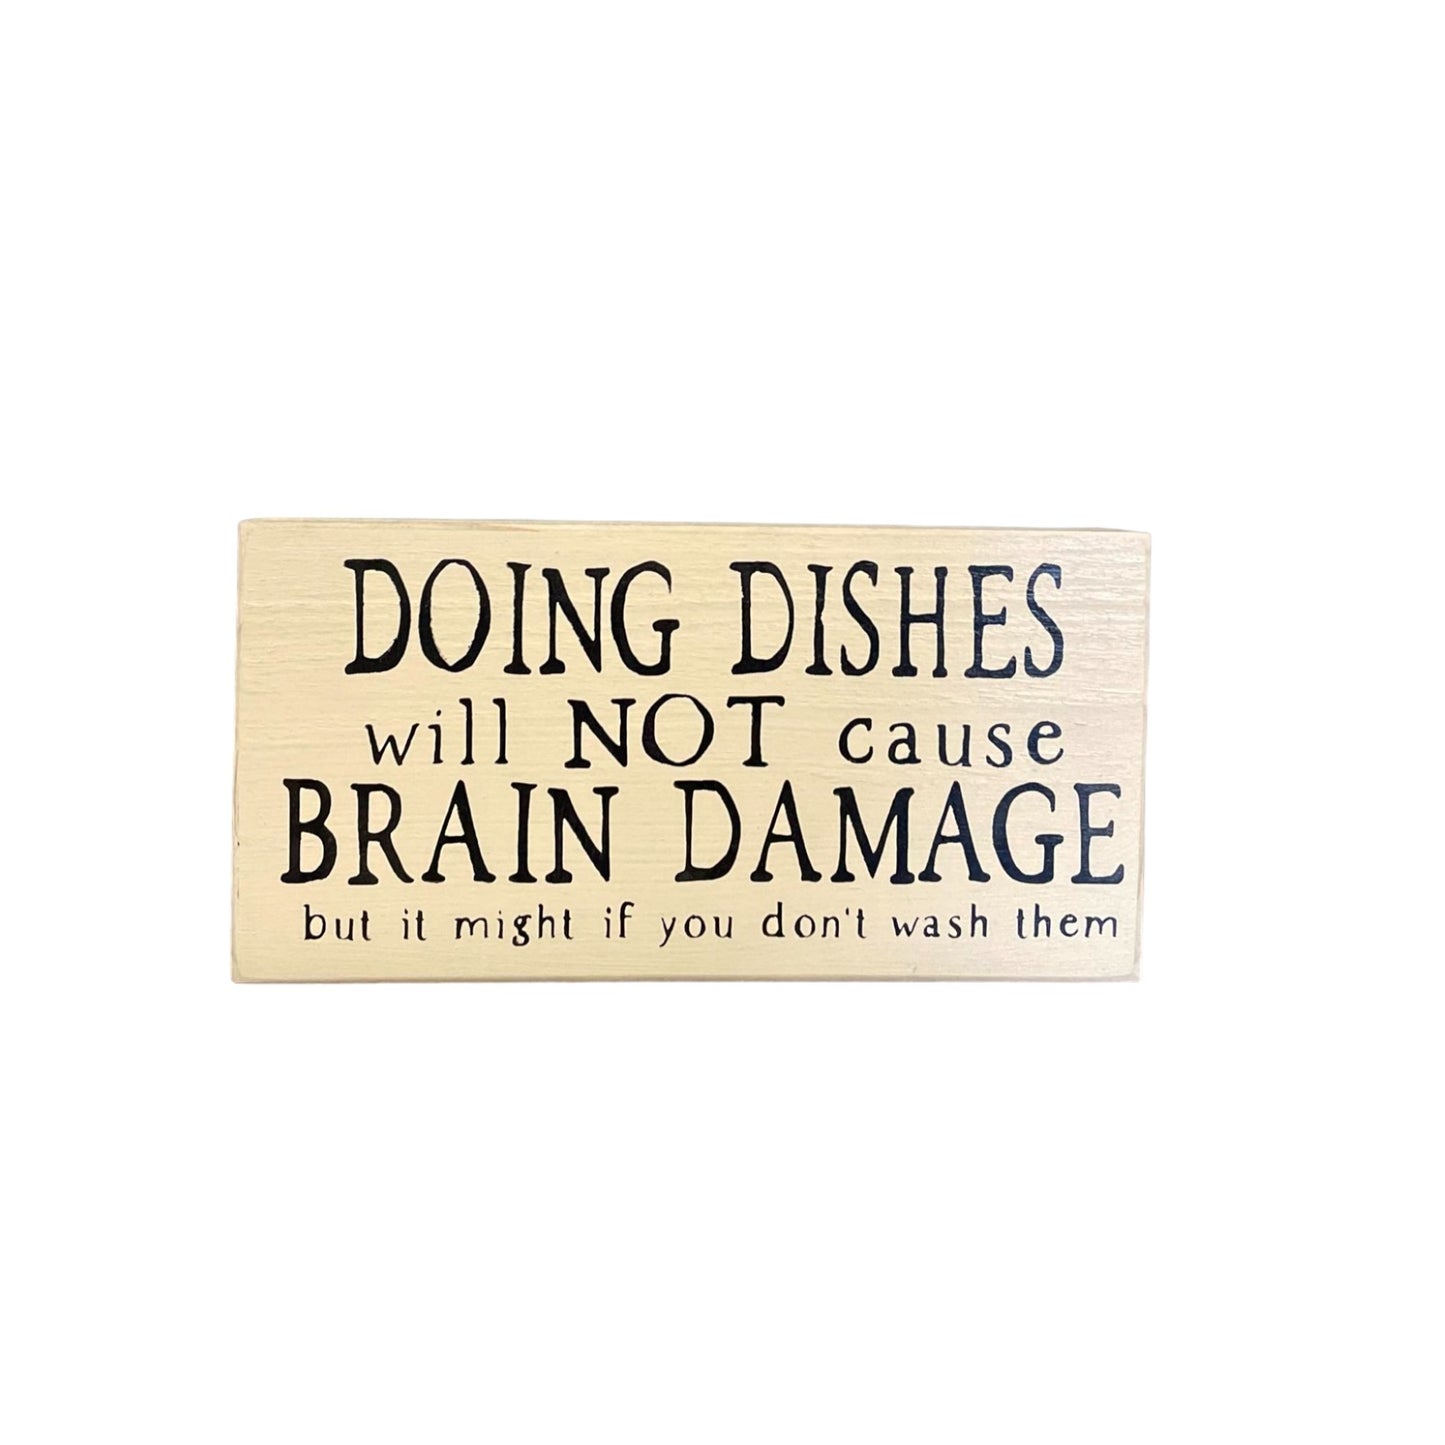 Funny kitchen wood sign with the message 'Dishes will not cause brain damage but it might if you don't wash them